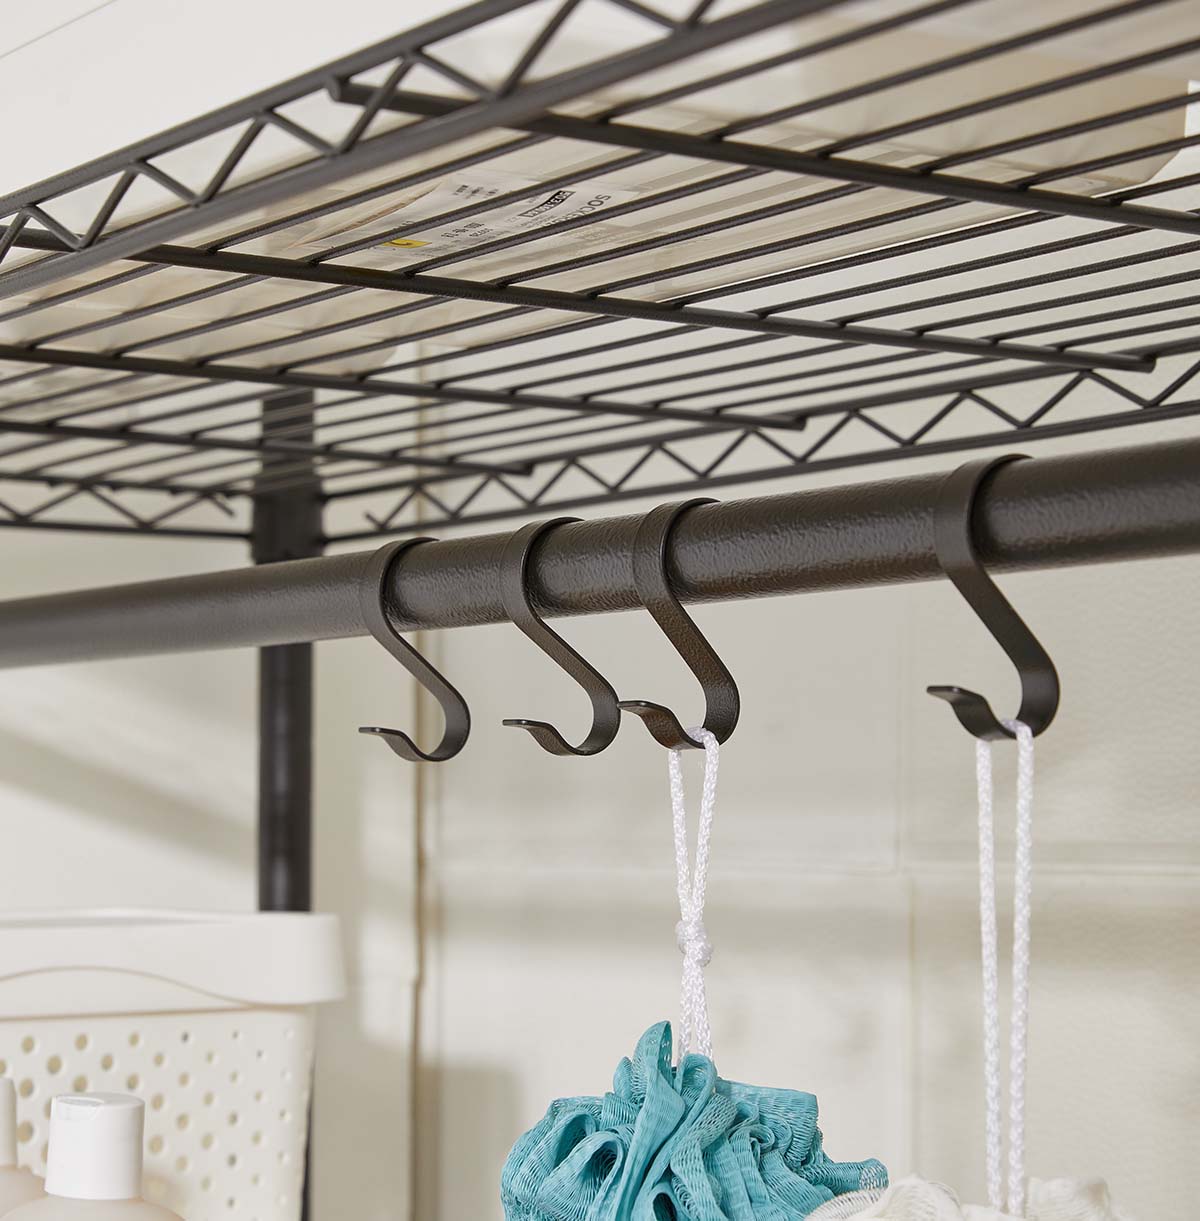 3-Tier Washing Machine Storage Rack with Hanging Rods and Hooks